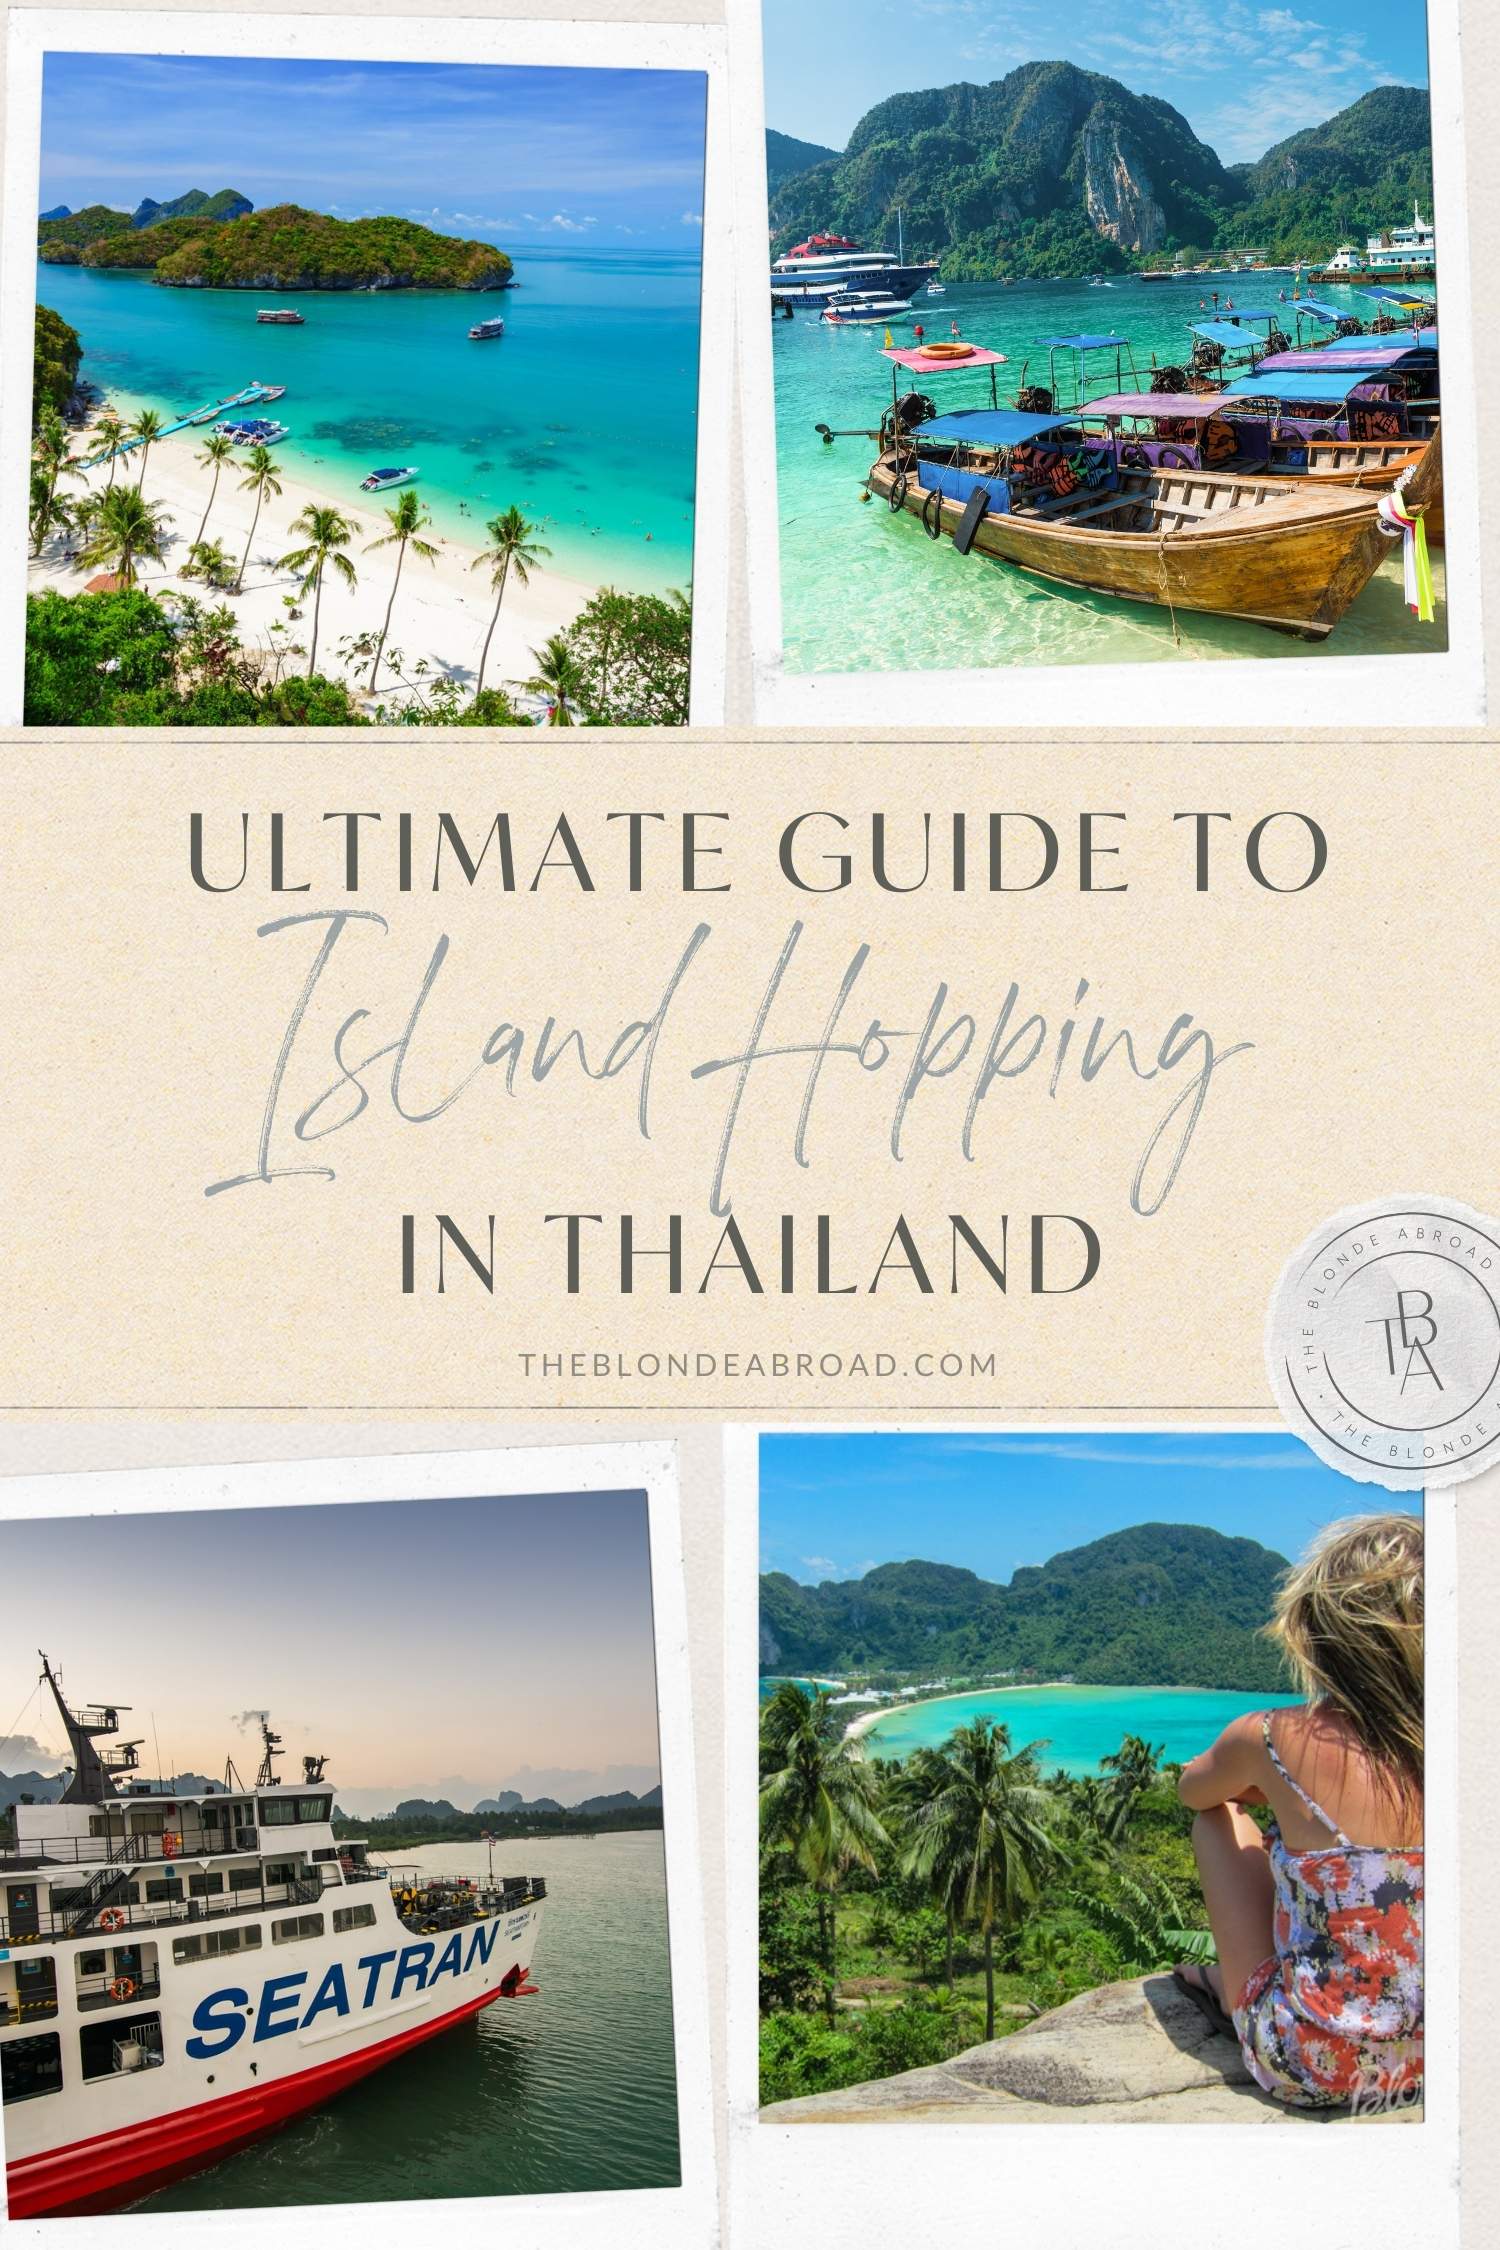 Ultimate Guide to Island Hopping in Thailand